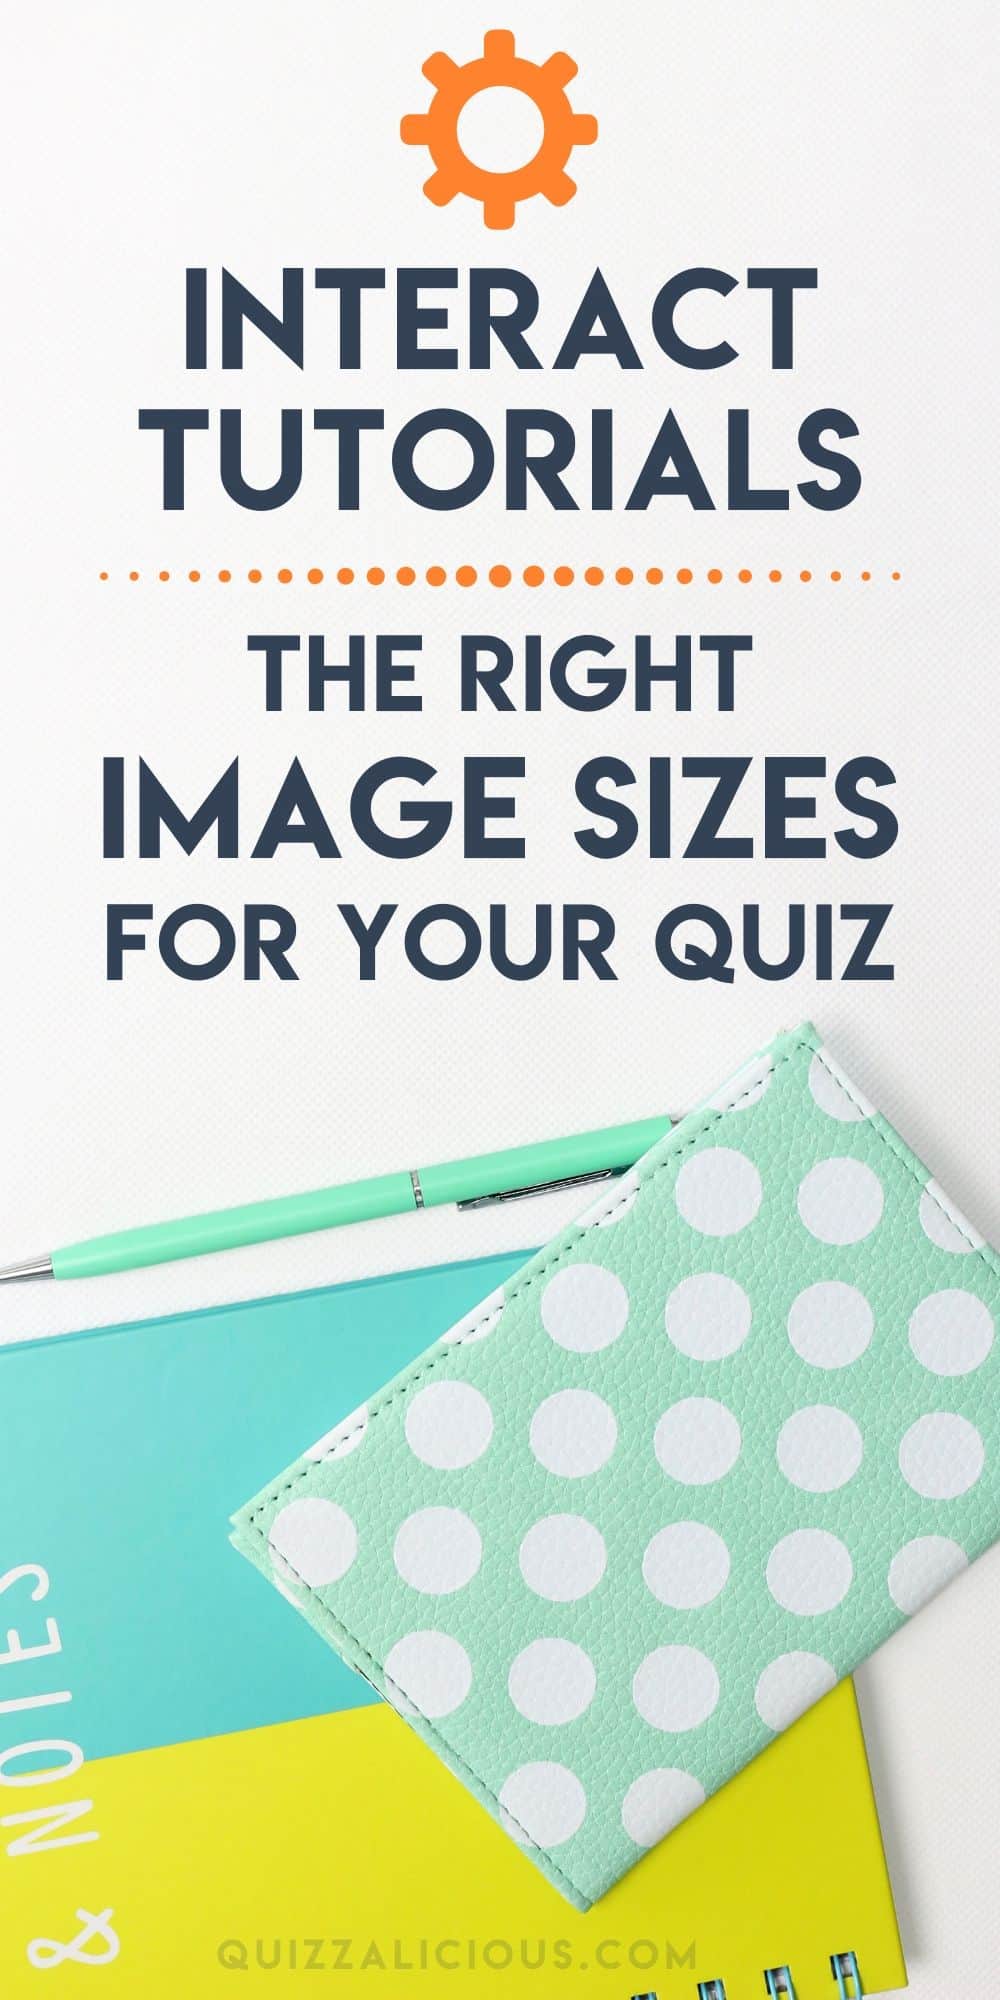 Interact Tutorials | The Right Image Sizes for Your Quiz